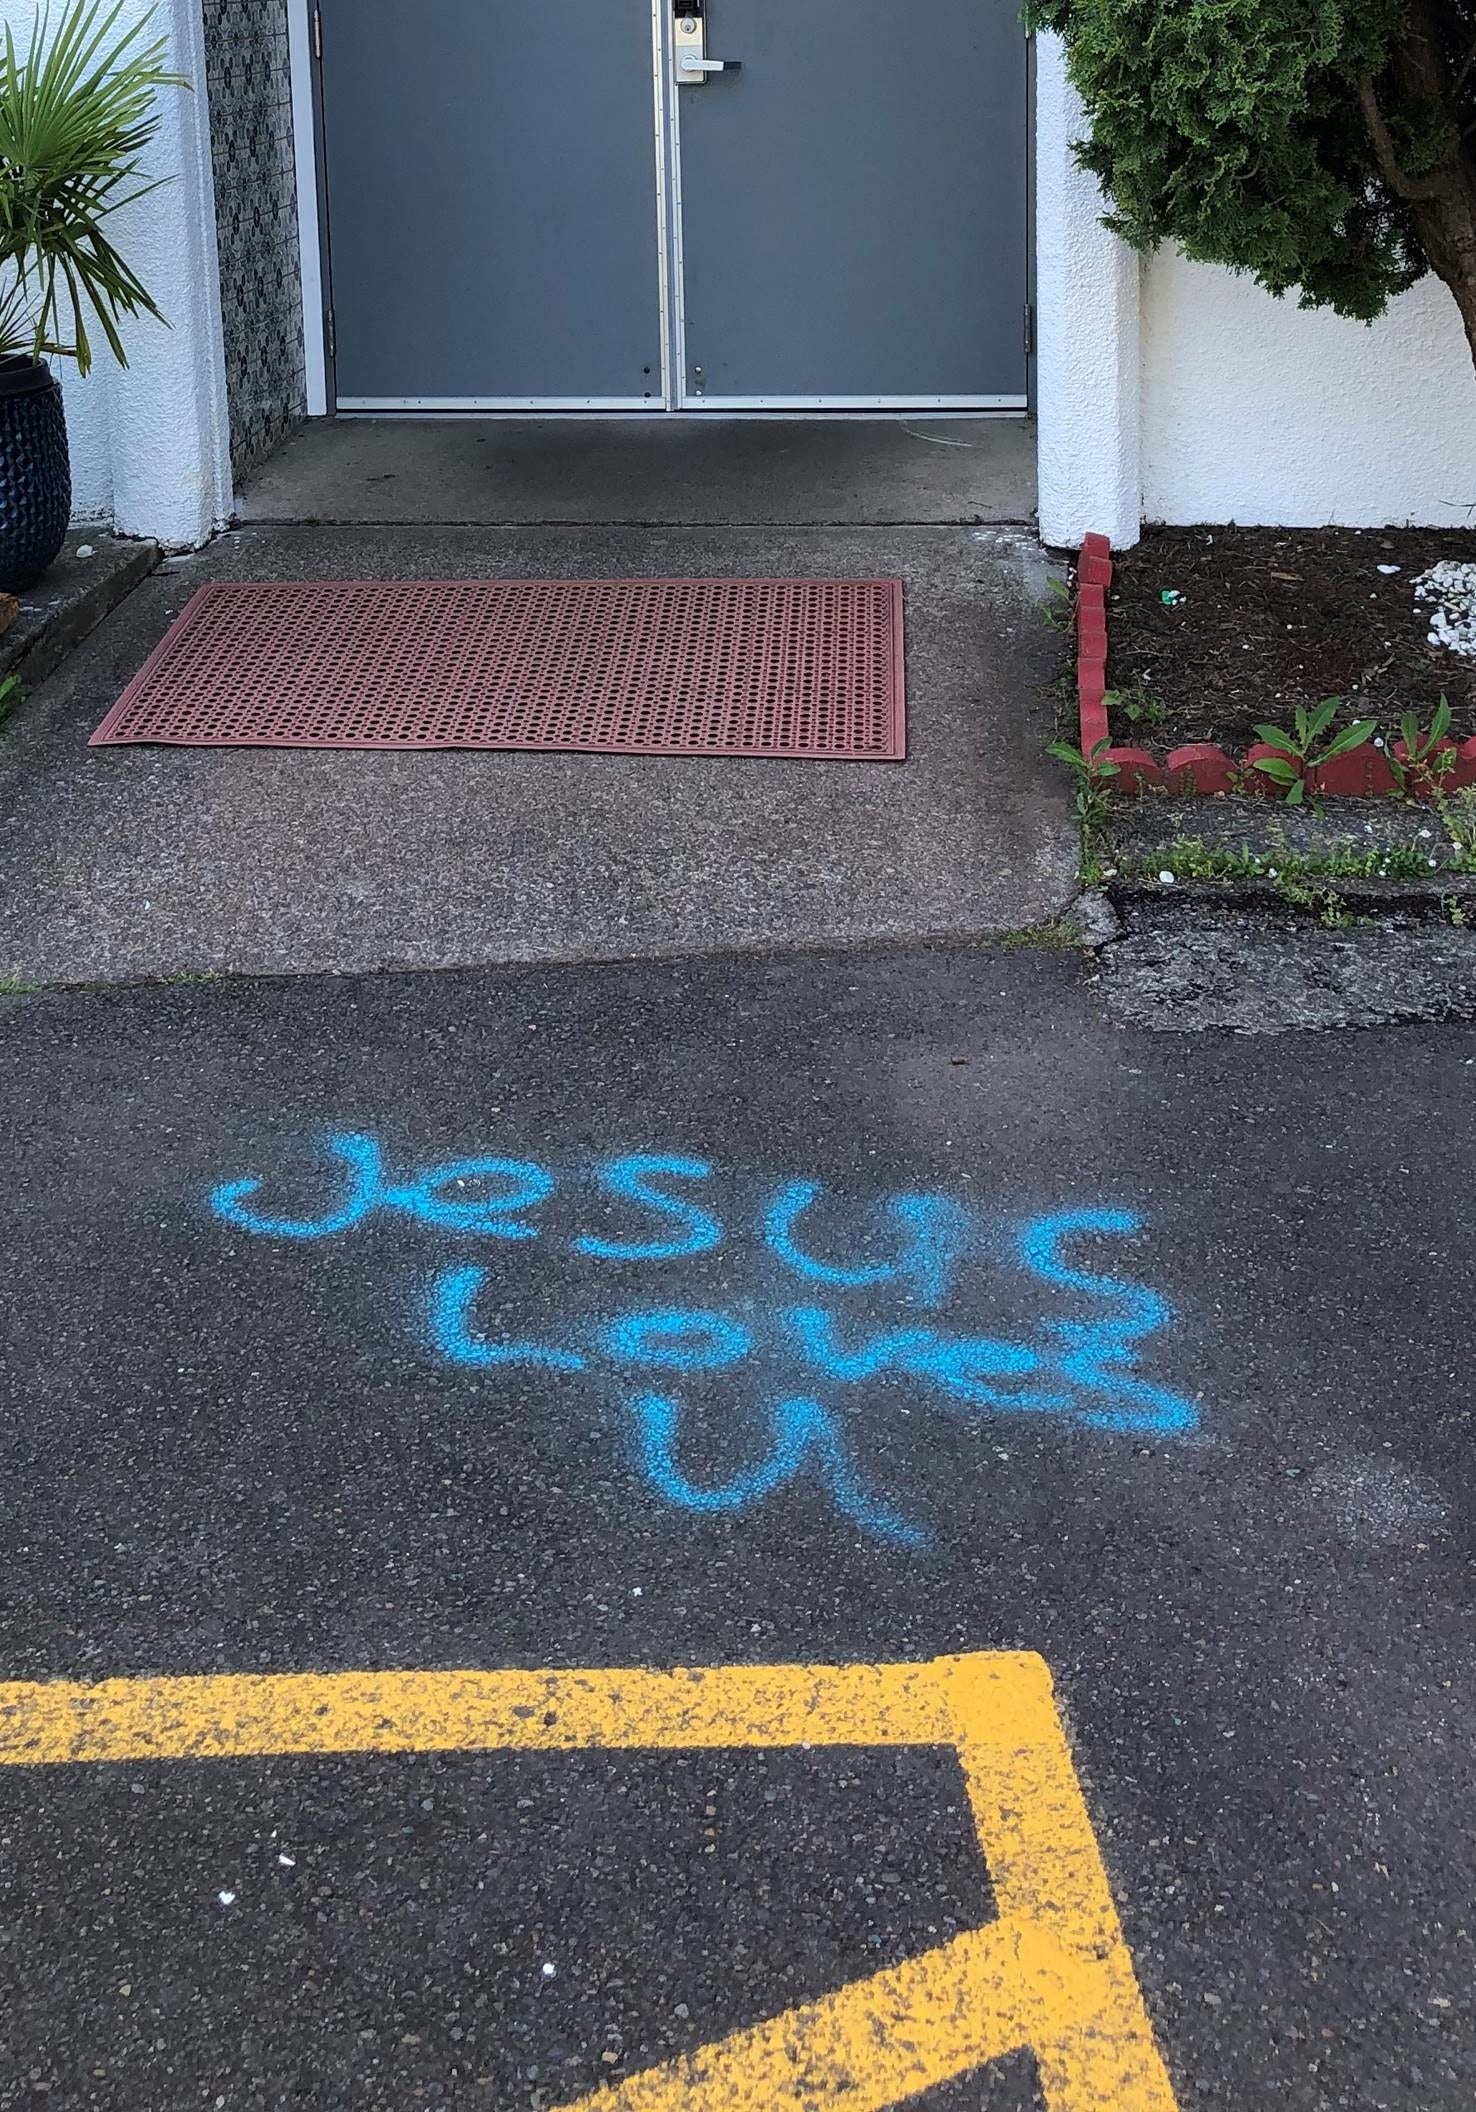 22-year-old arrested for writing ‘Jesus loves you’ on public and private property